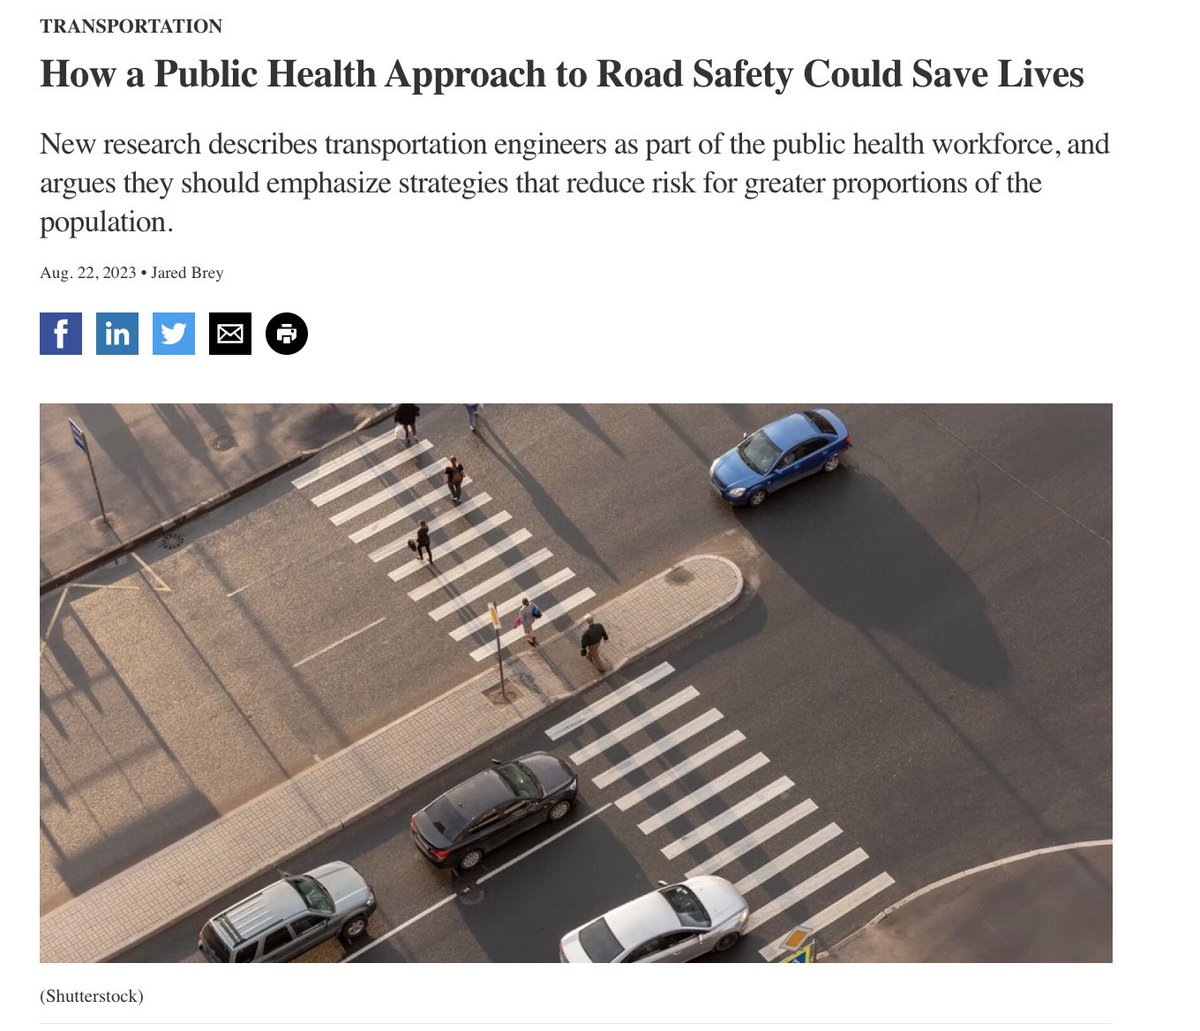 How a Public Health Approach to Road Safety Could Save Lives